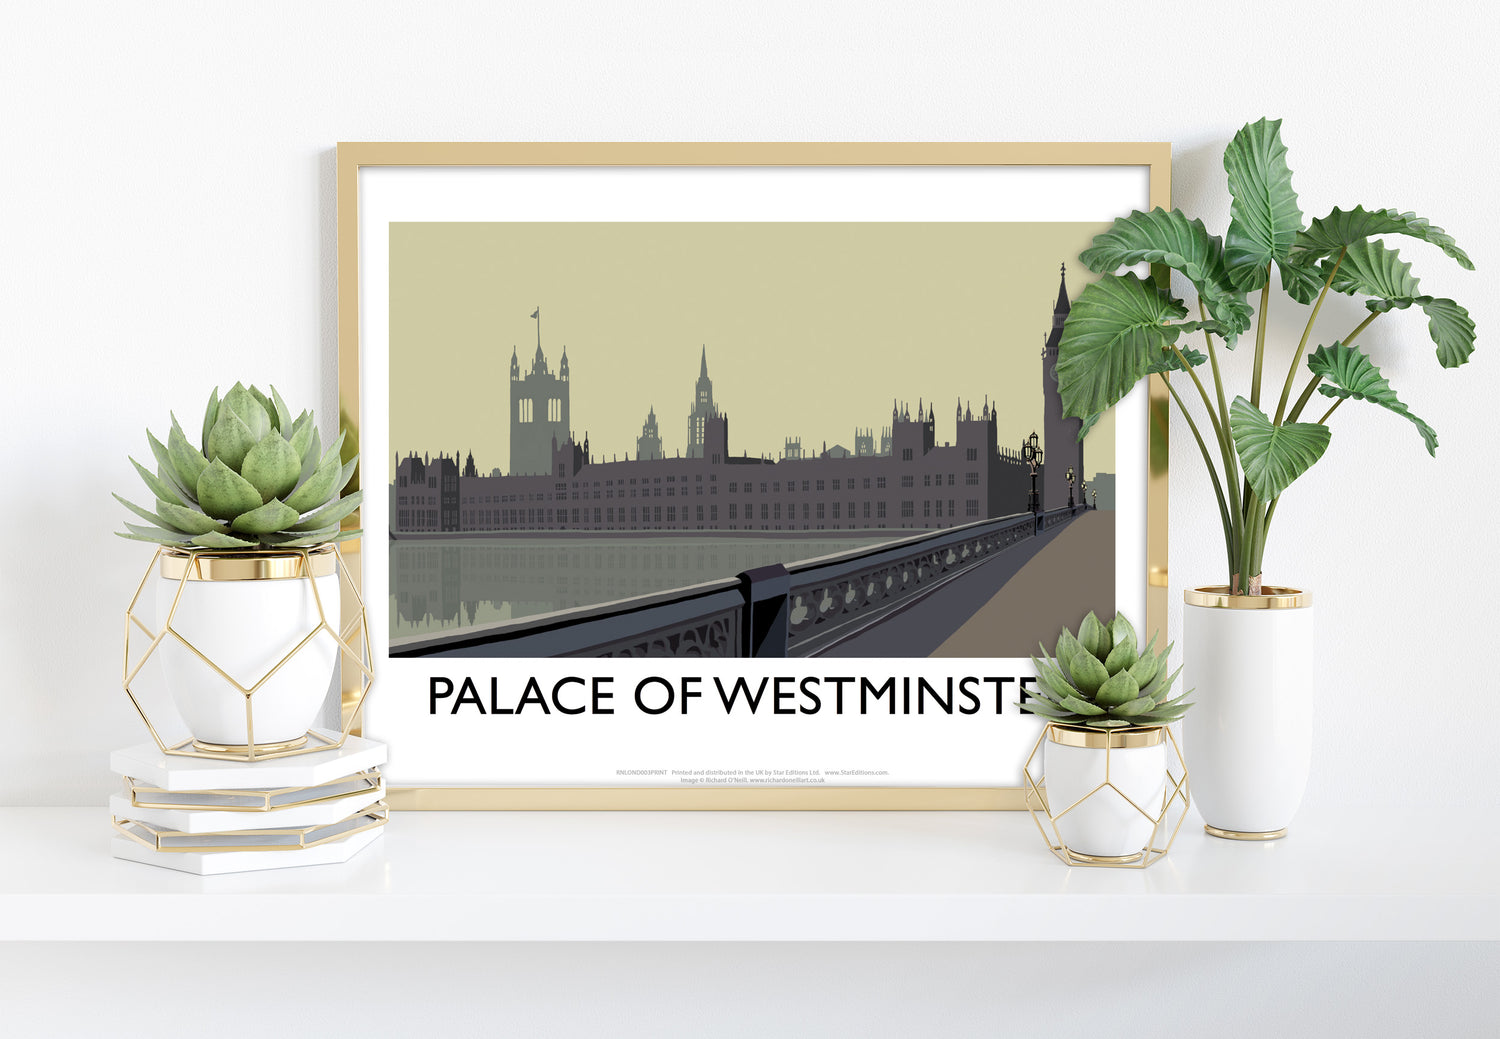 The Palace of Westminster, London - Art Print